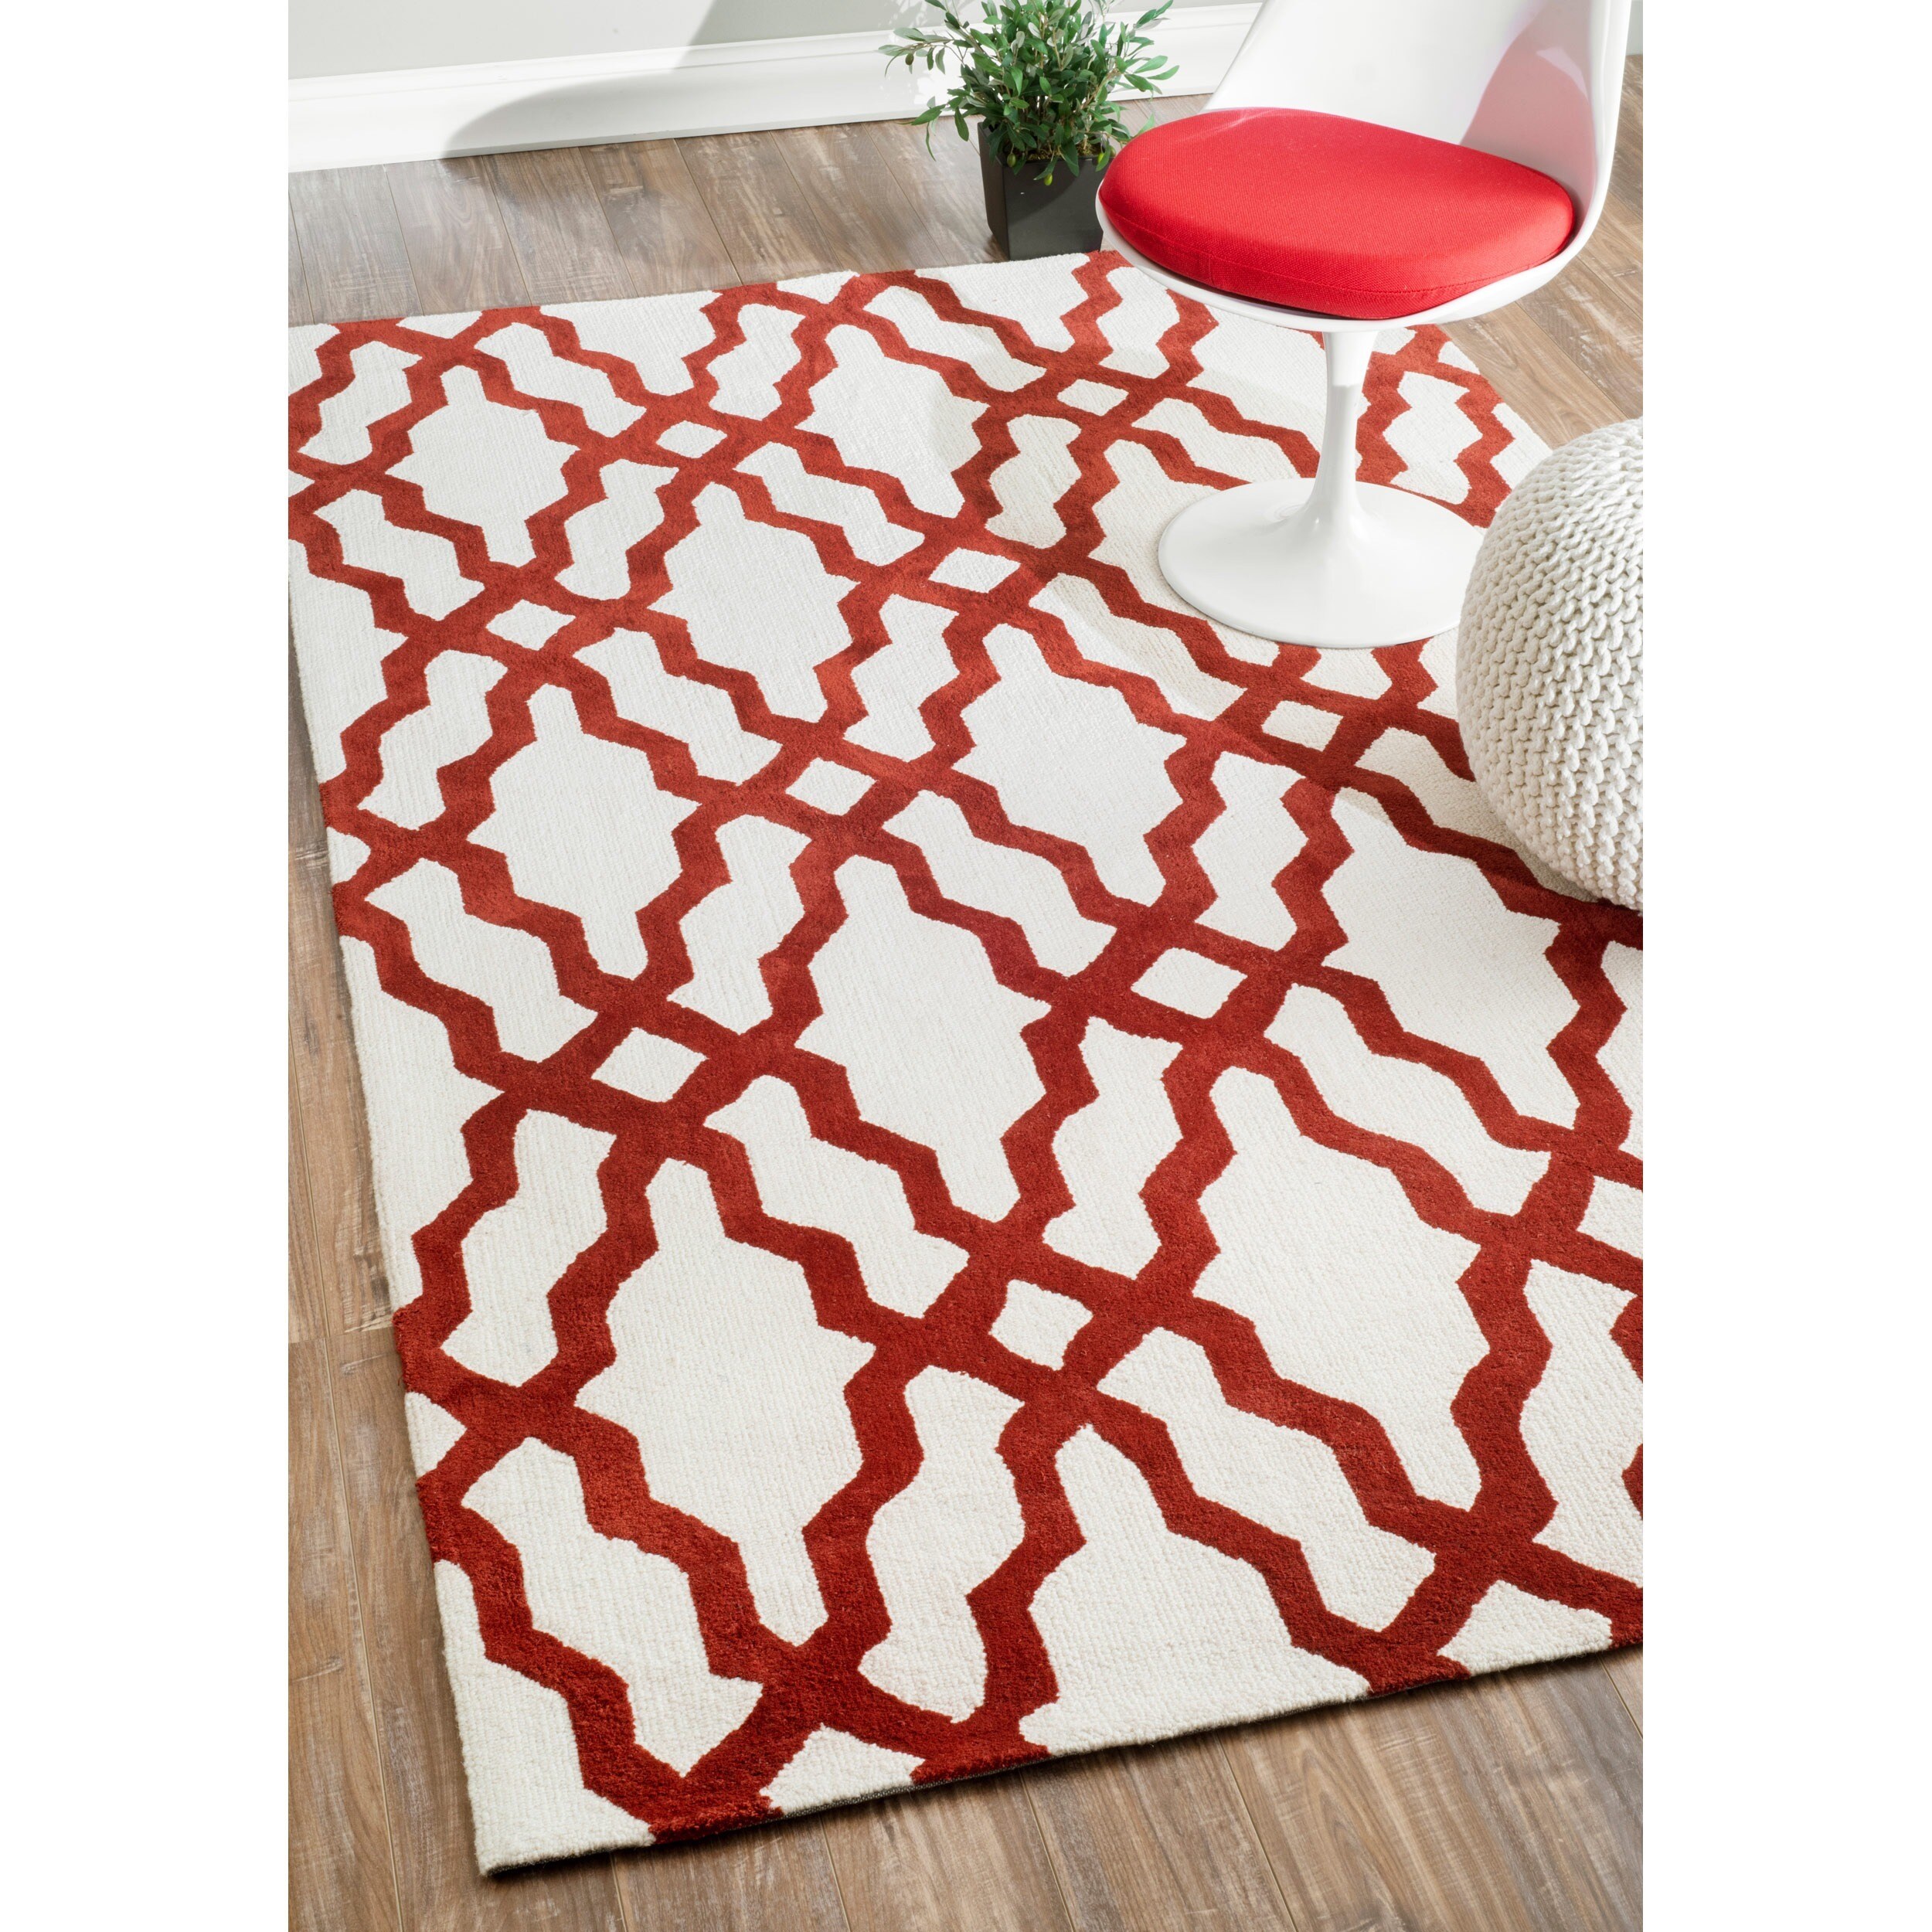 Nuloom Hand hooked Red Wool Rug (5 X 8)